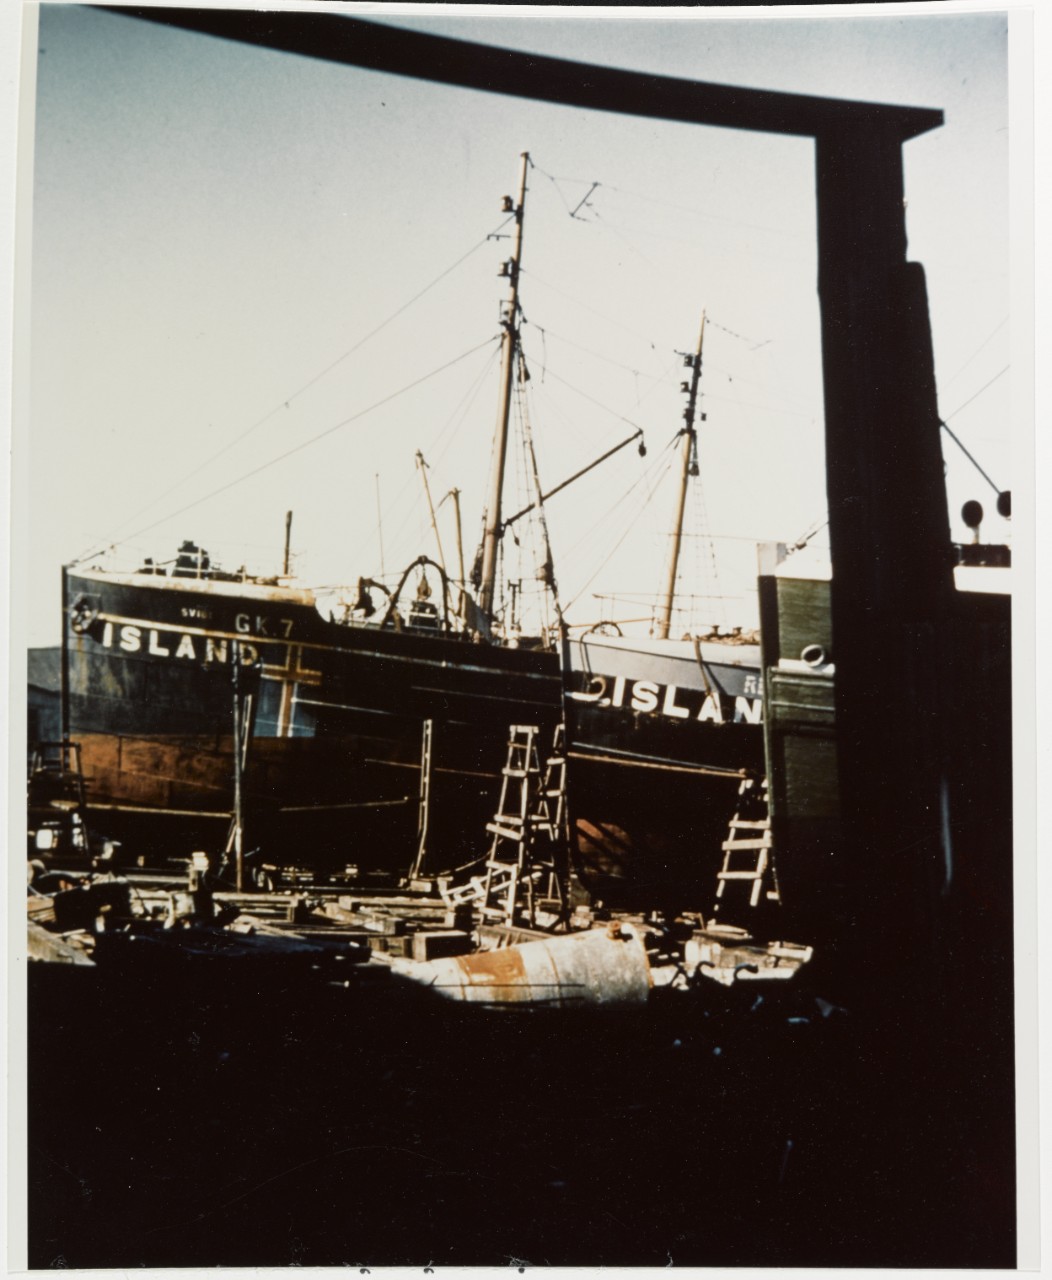 Local fishing trawlers at a Reykjavik Shipyard, initial occupation of Iceland, July 1941